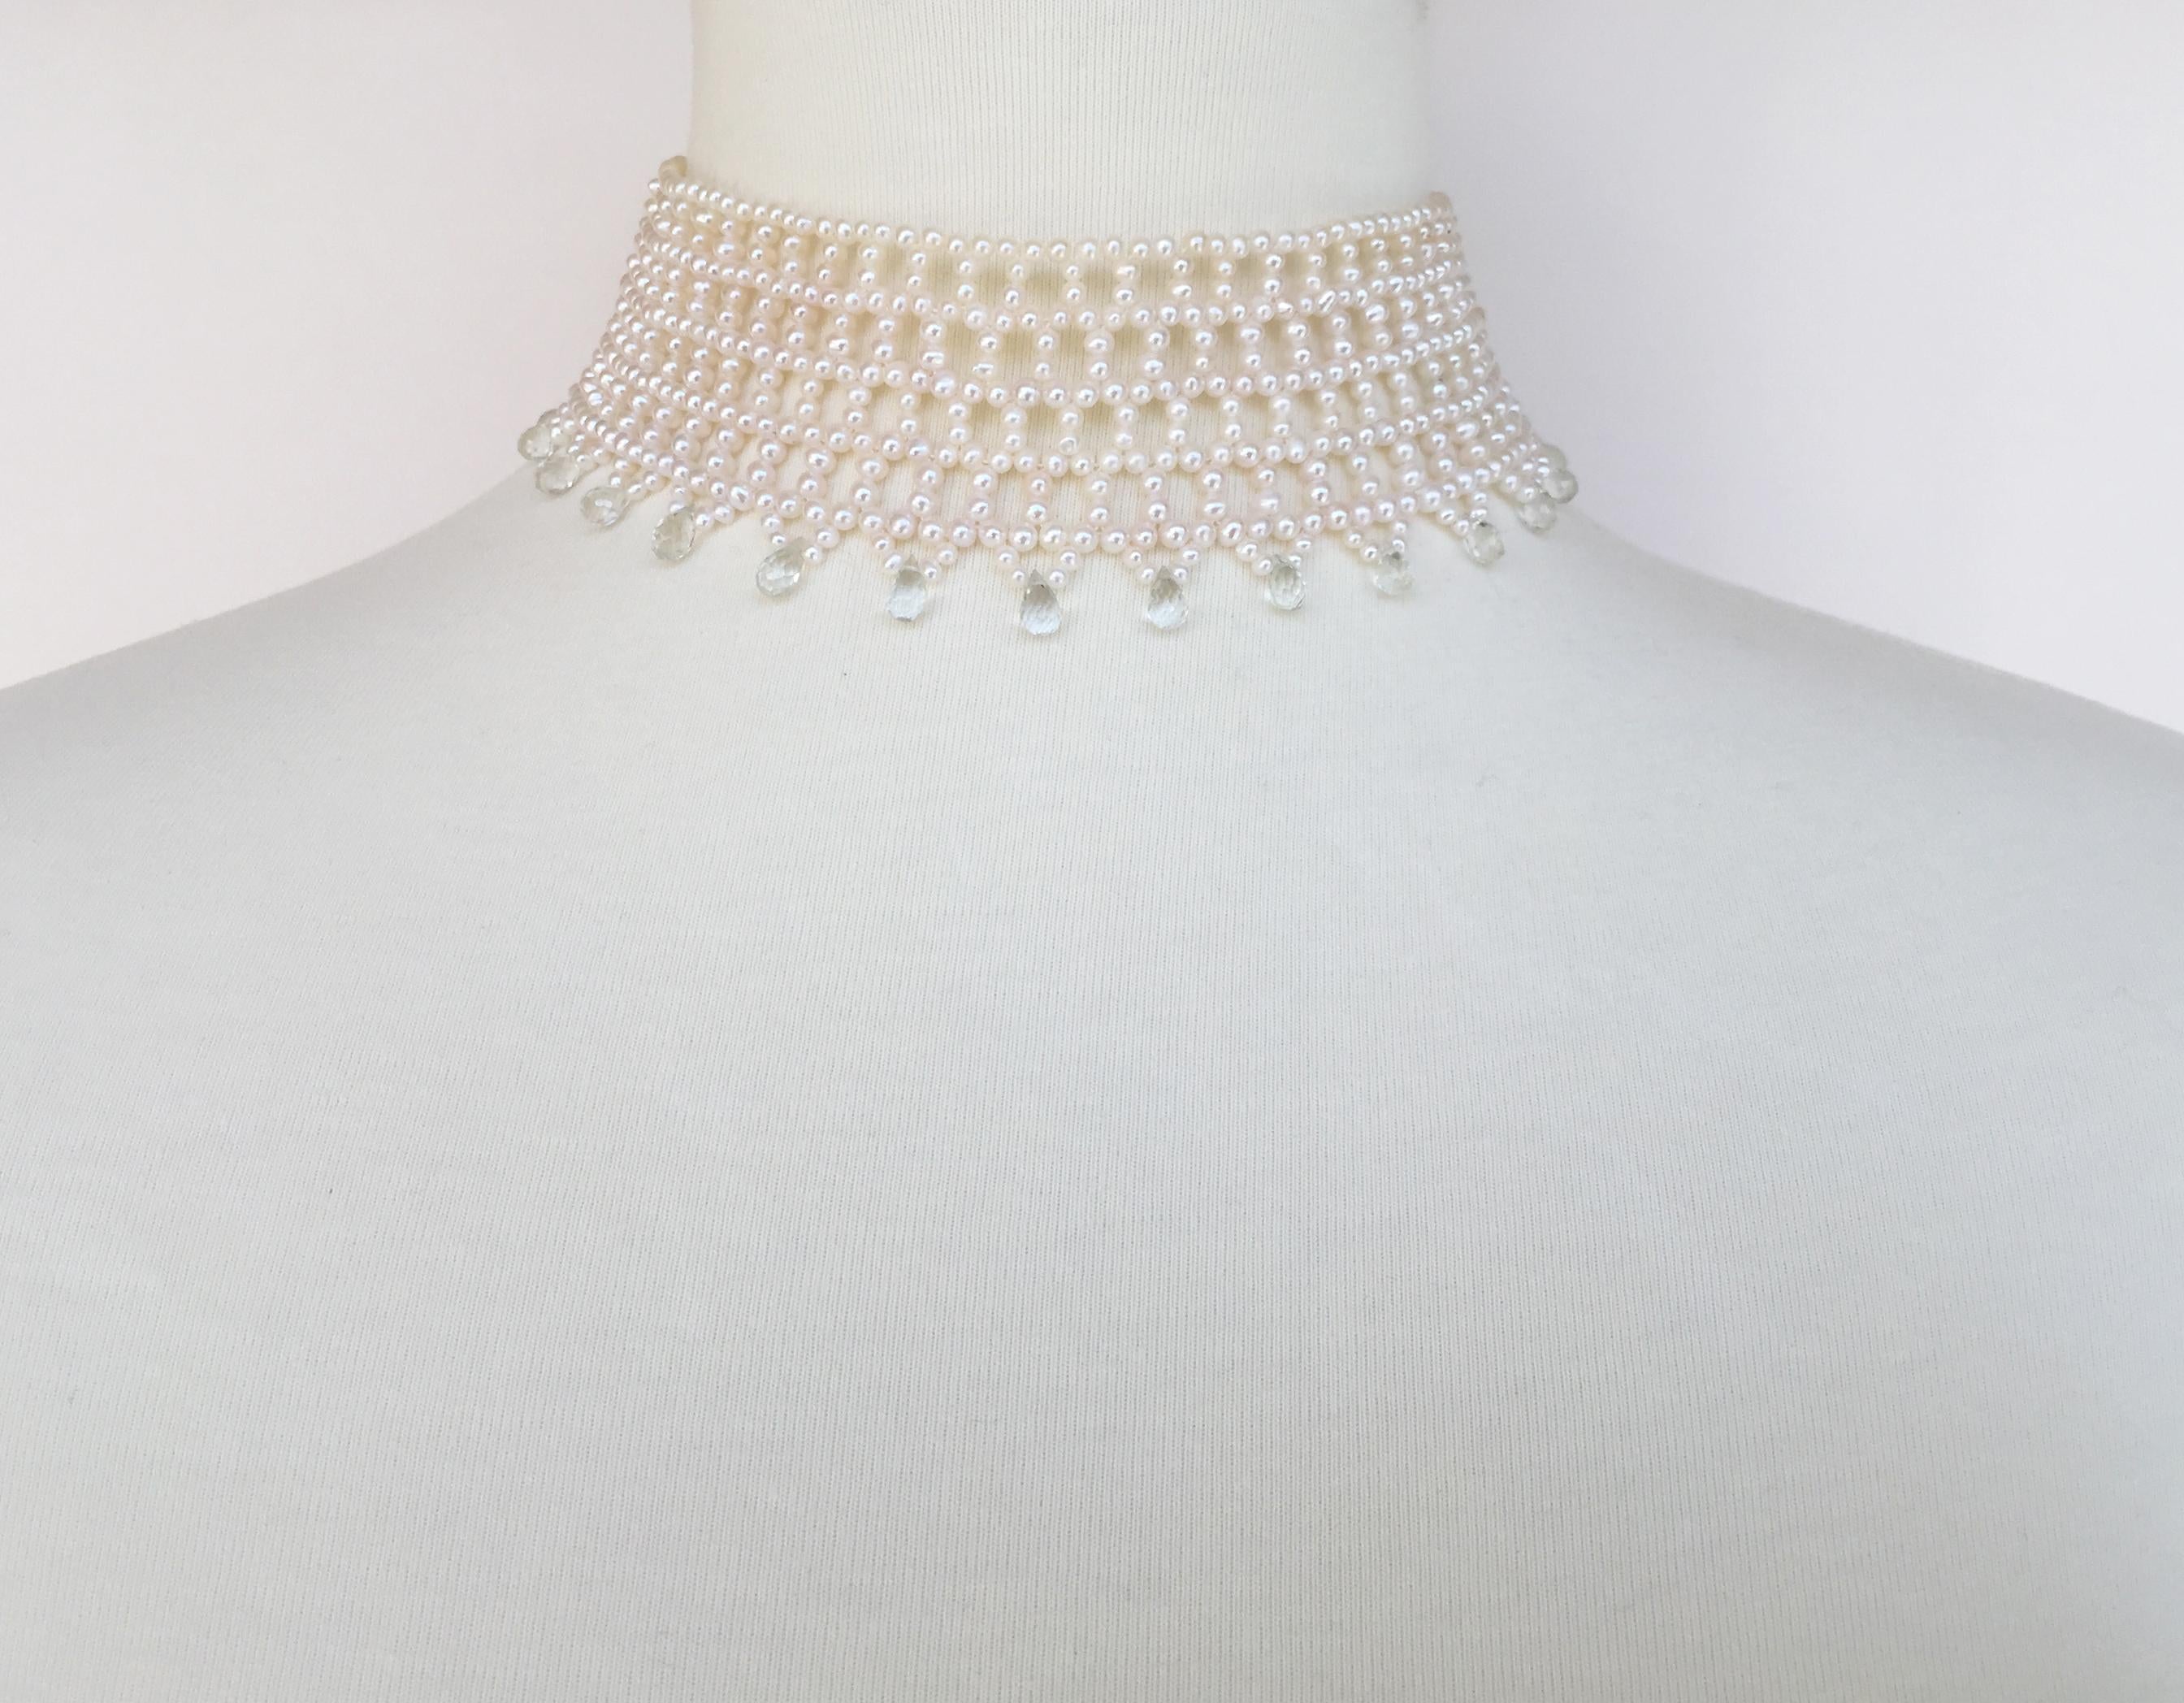 This wide woven white pearl choker with green amethyst briolettes and sliding sterling silver clasp (rhodium plated) was handcrafted by Marina J. Translucent green amethyst faceted briolettes highlight the glowing white pearls of this choker. The